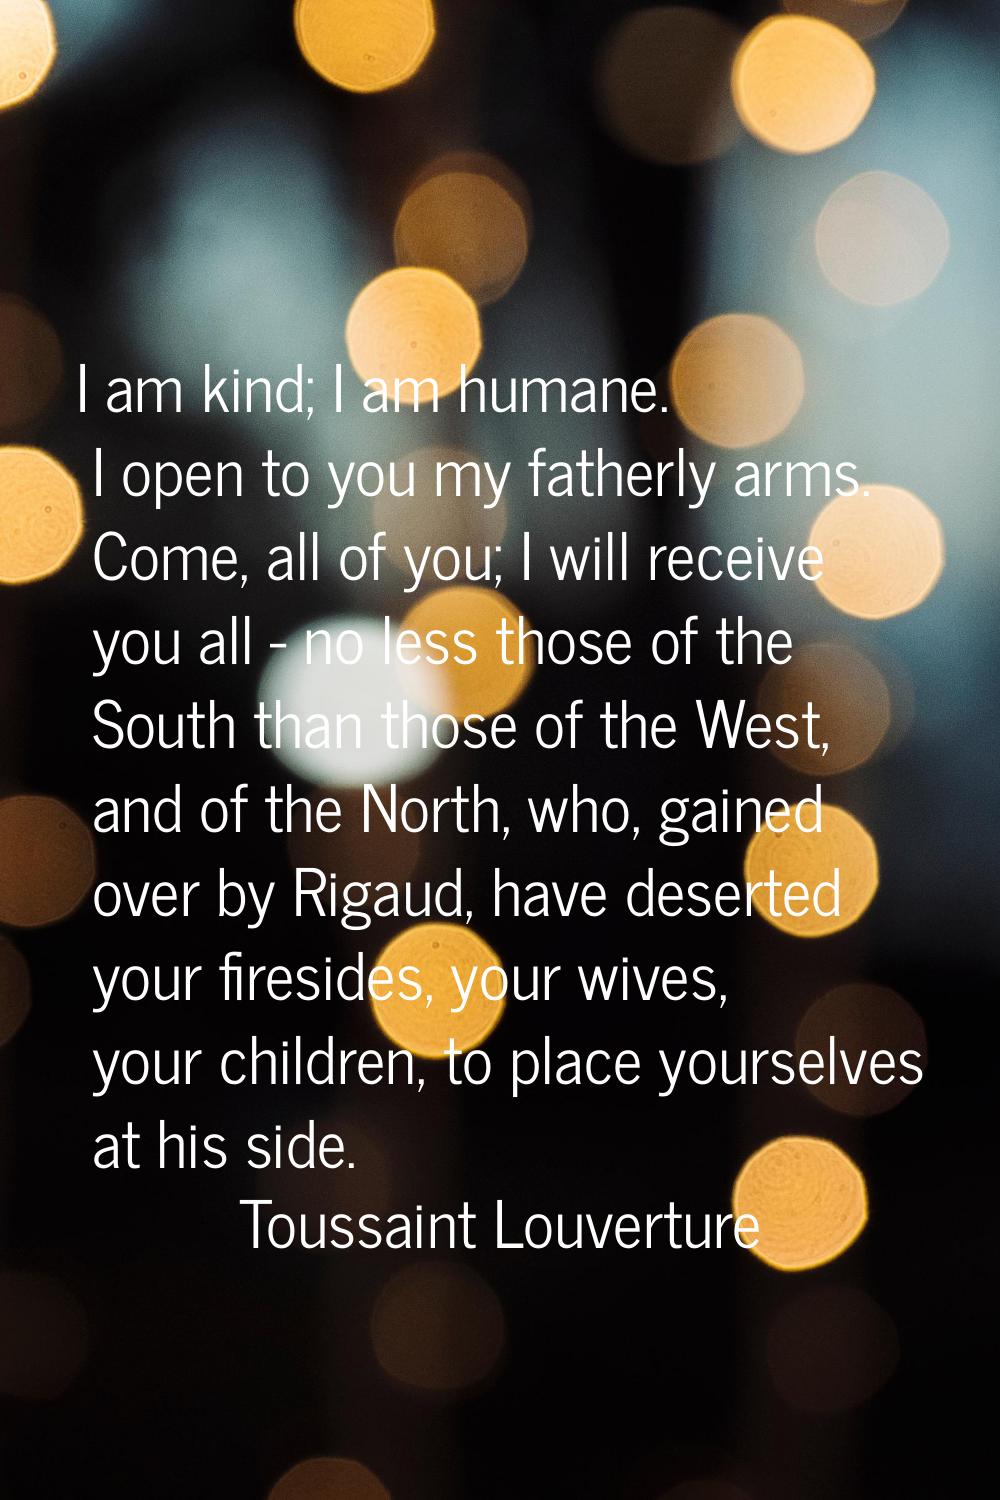 I am kind; I am humane. I open to you my fatherly arms. Come, all of you; I will receive you all - 